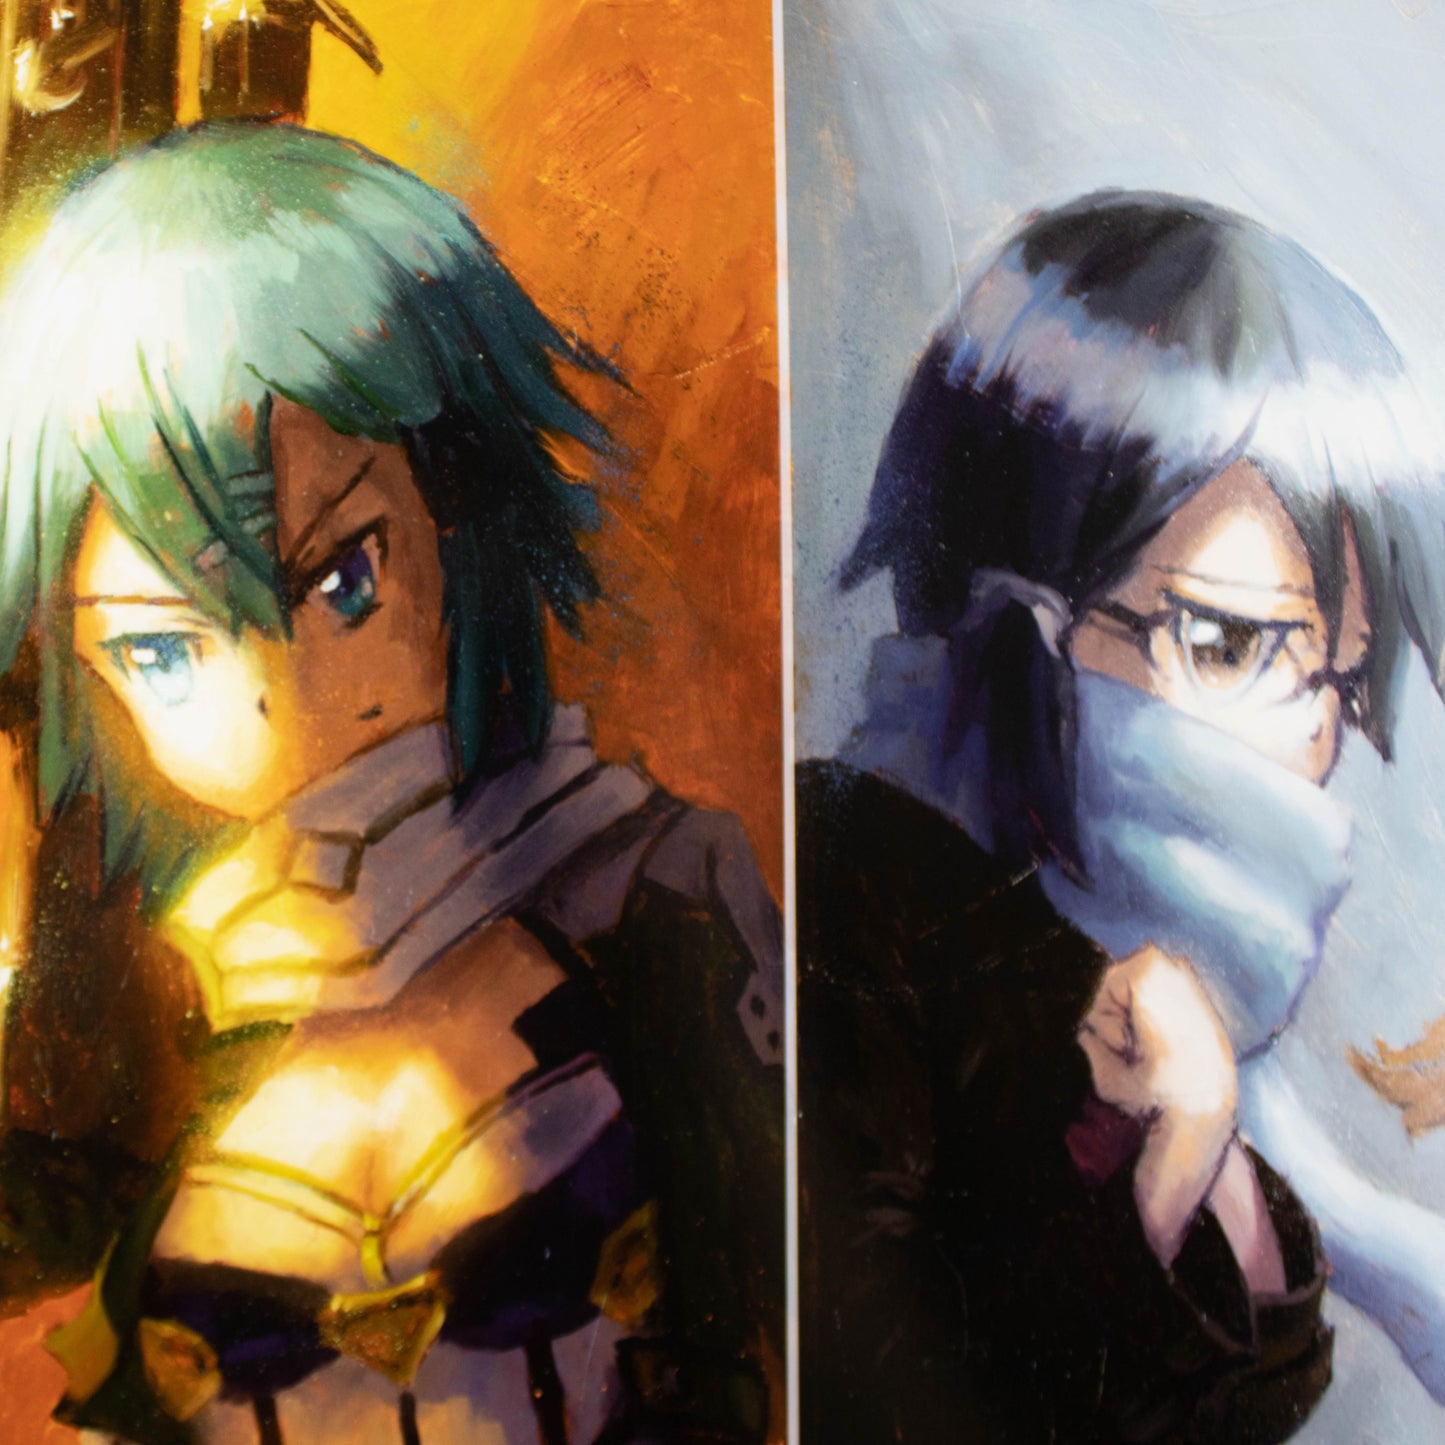 Load image into Gallery viewer, Sinon and Asada Sword Art Online Art Print
